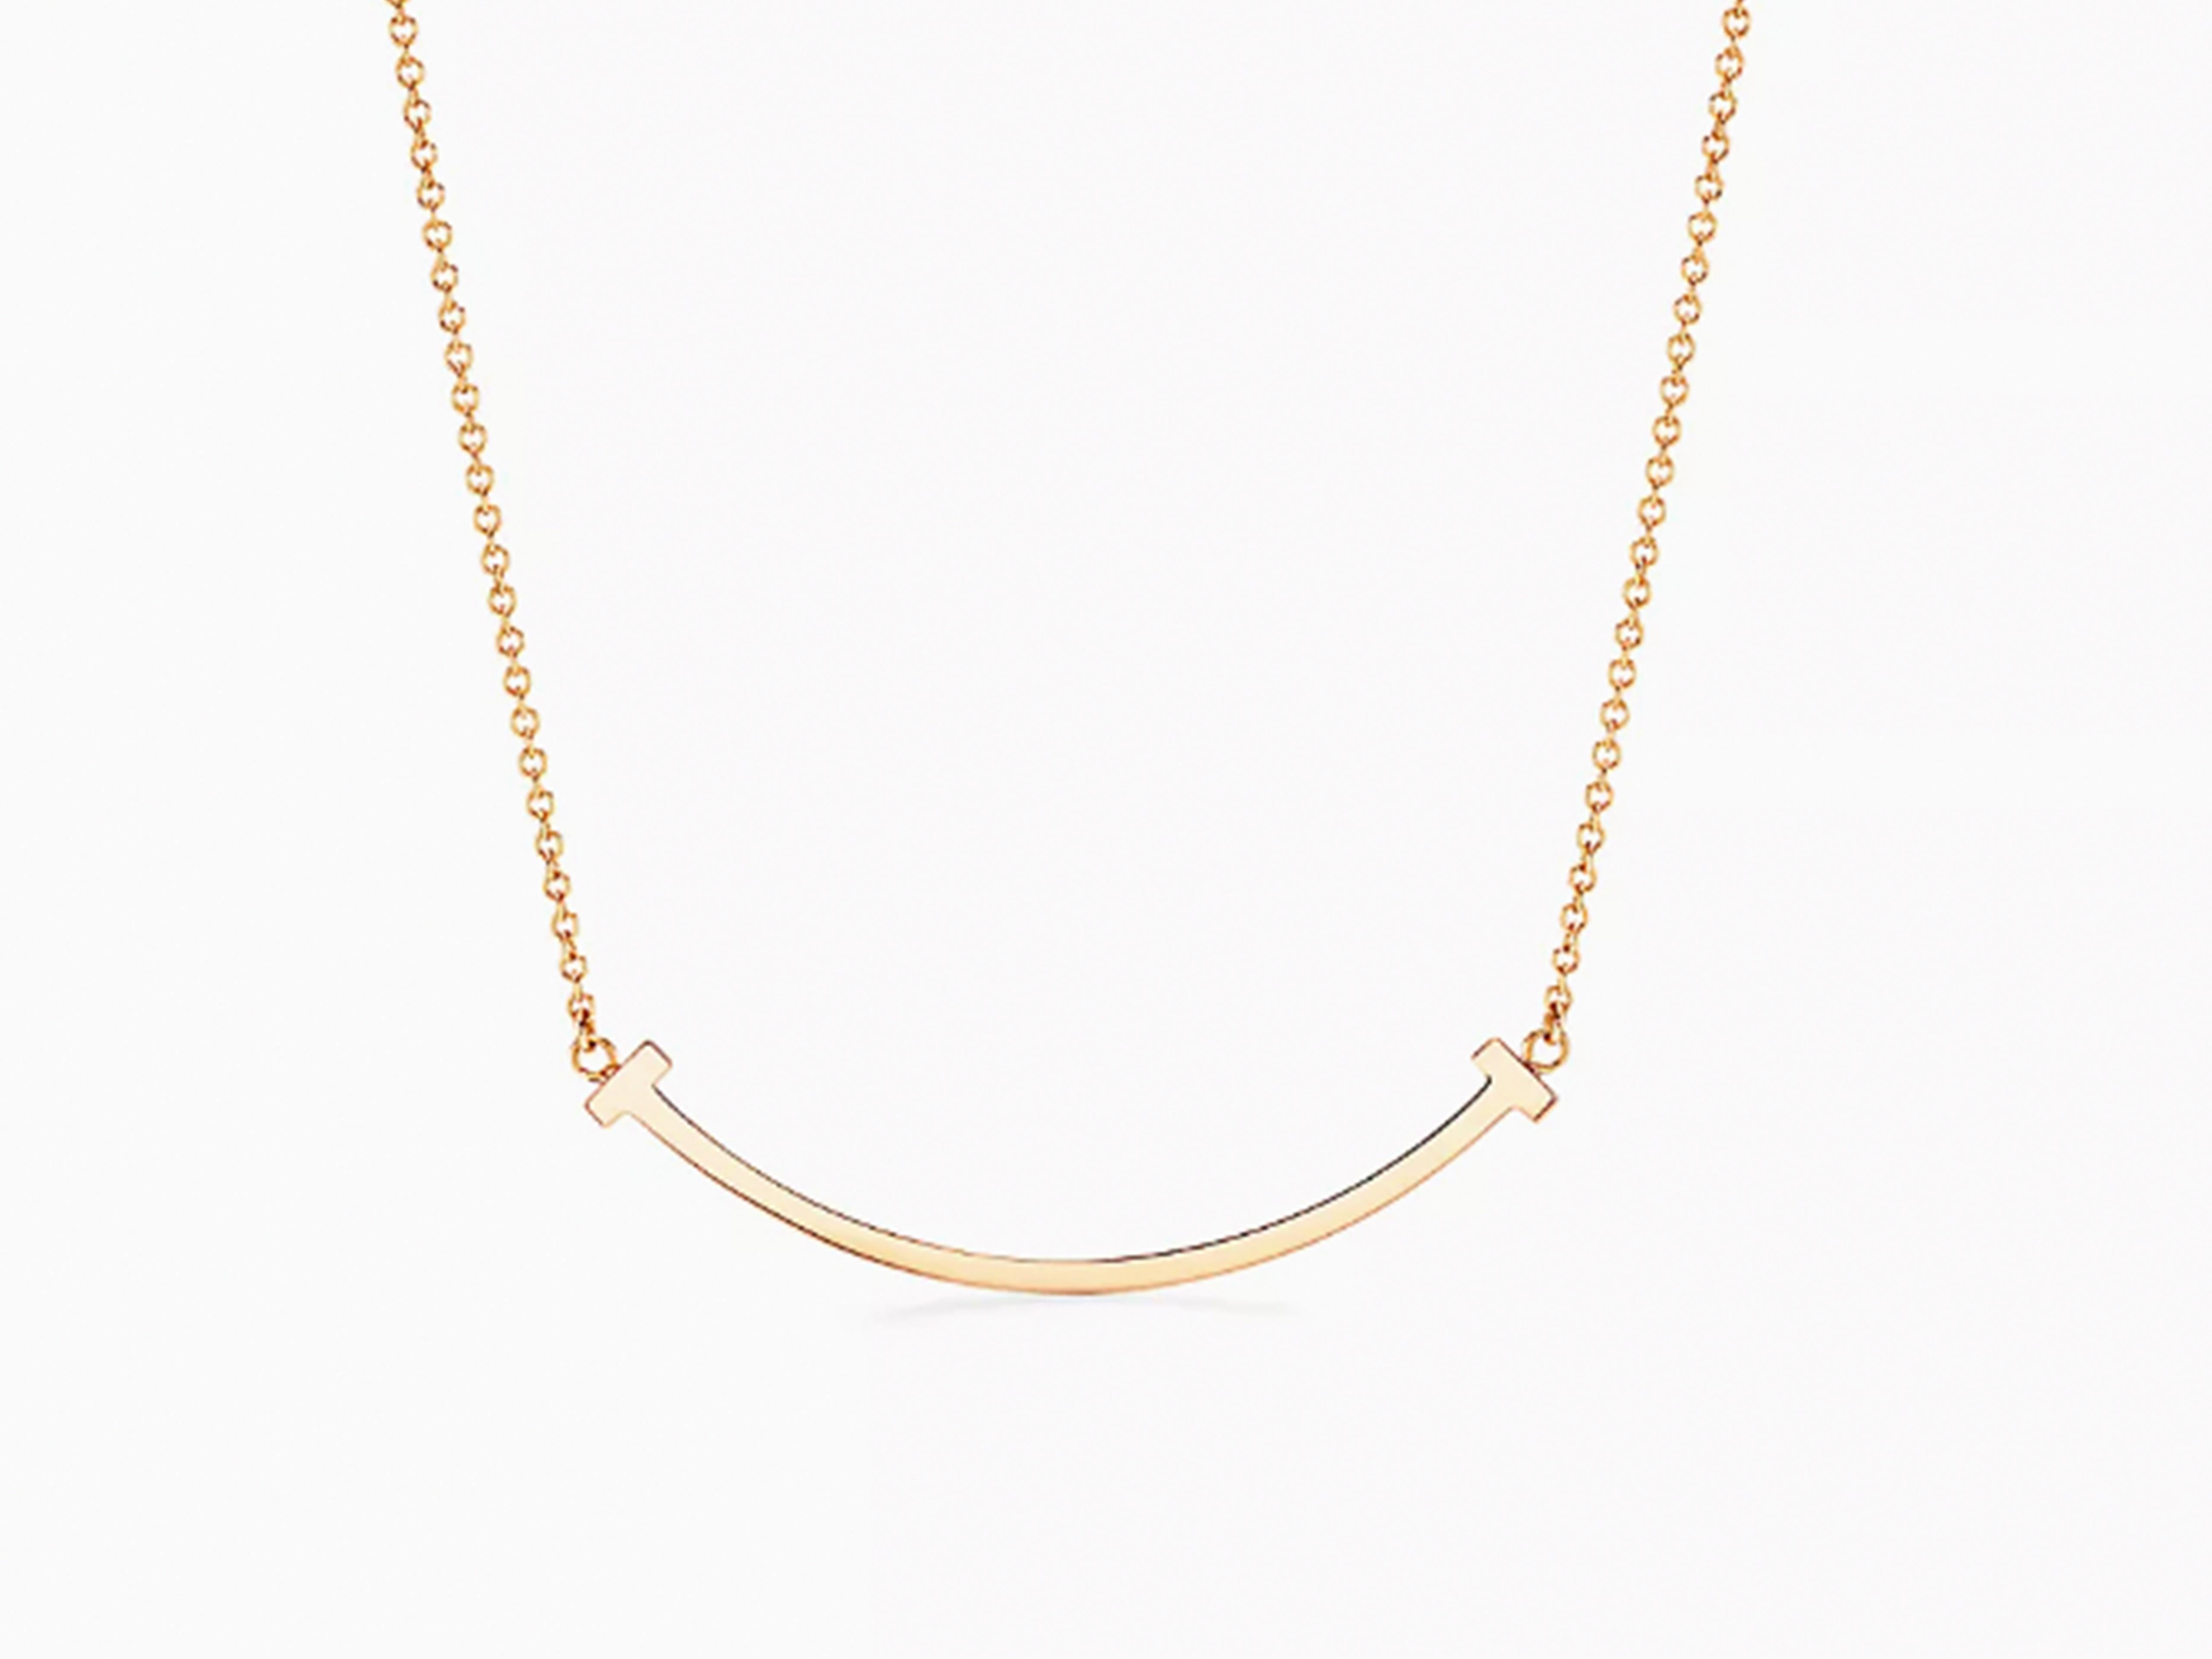 Necklace Specifications:

Brand: Tiffany & Co.

Metal: 18k Yellow Gold

Pendant Measurements: 1.40